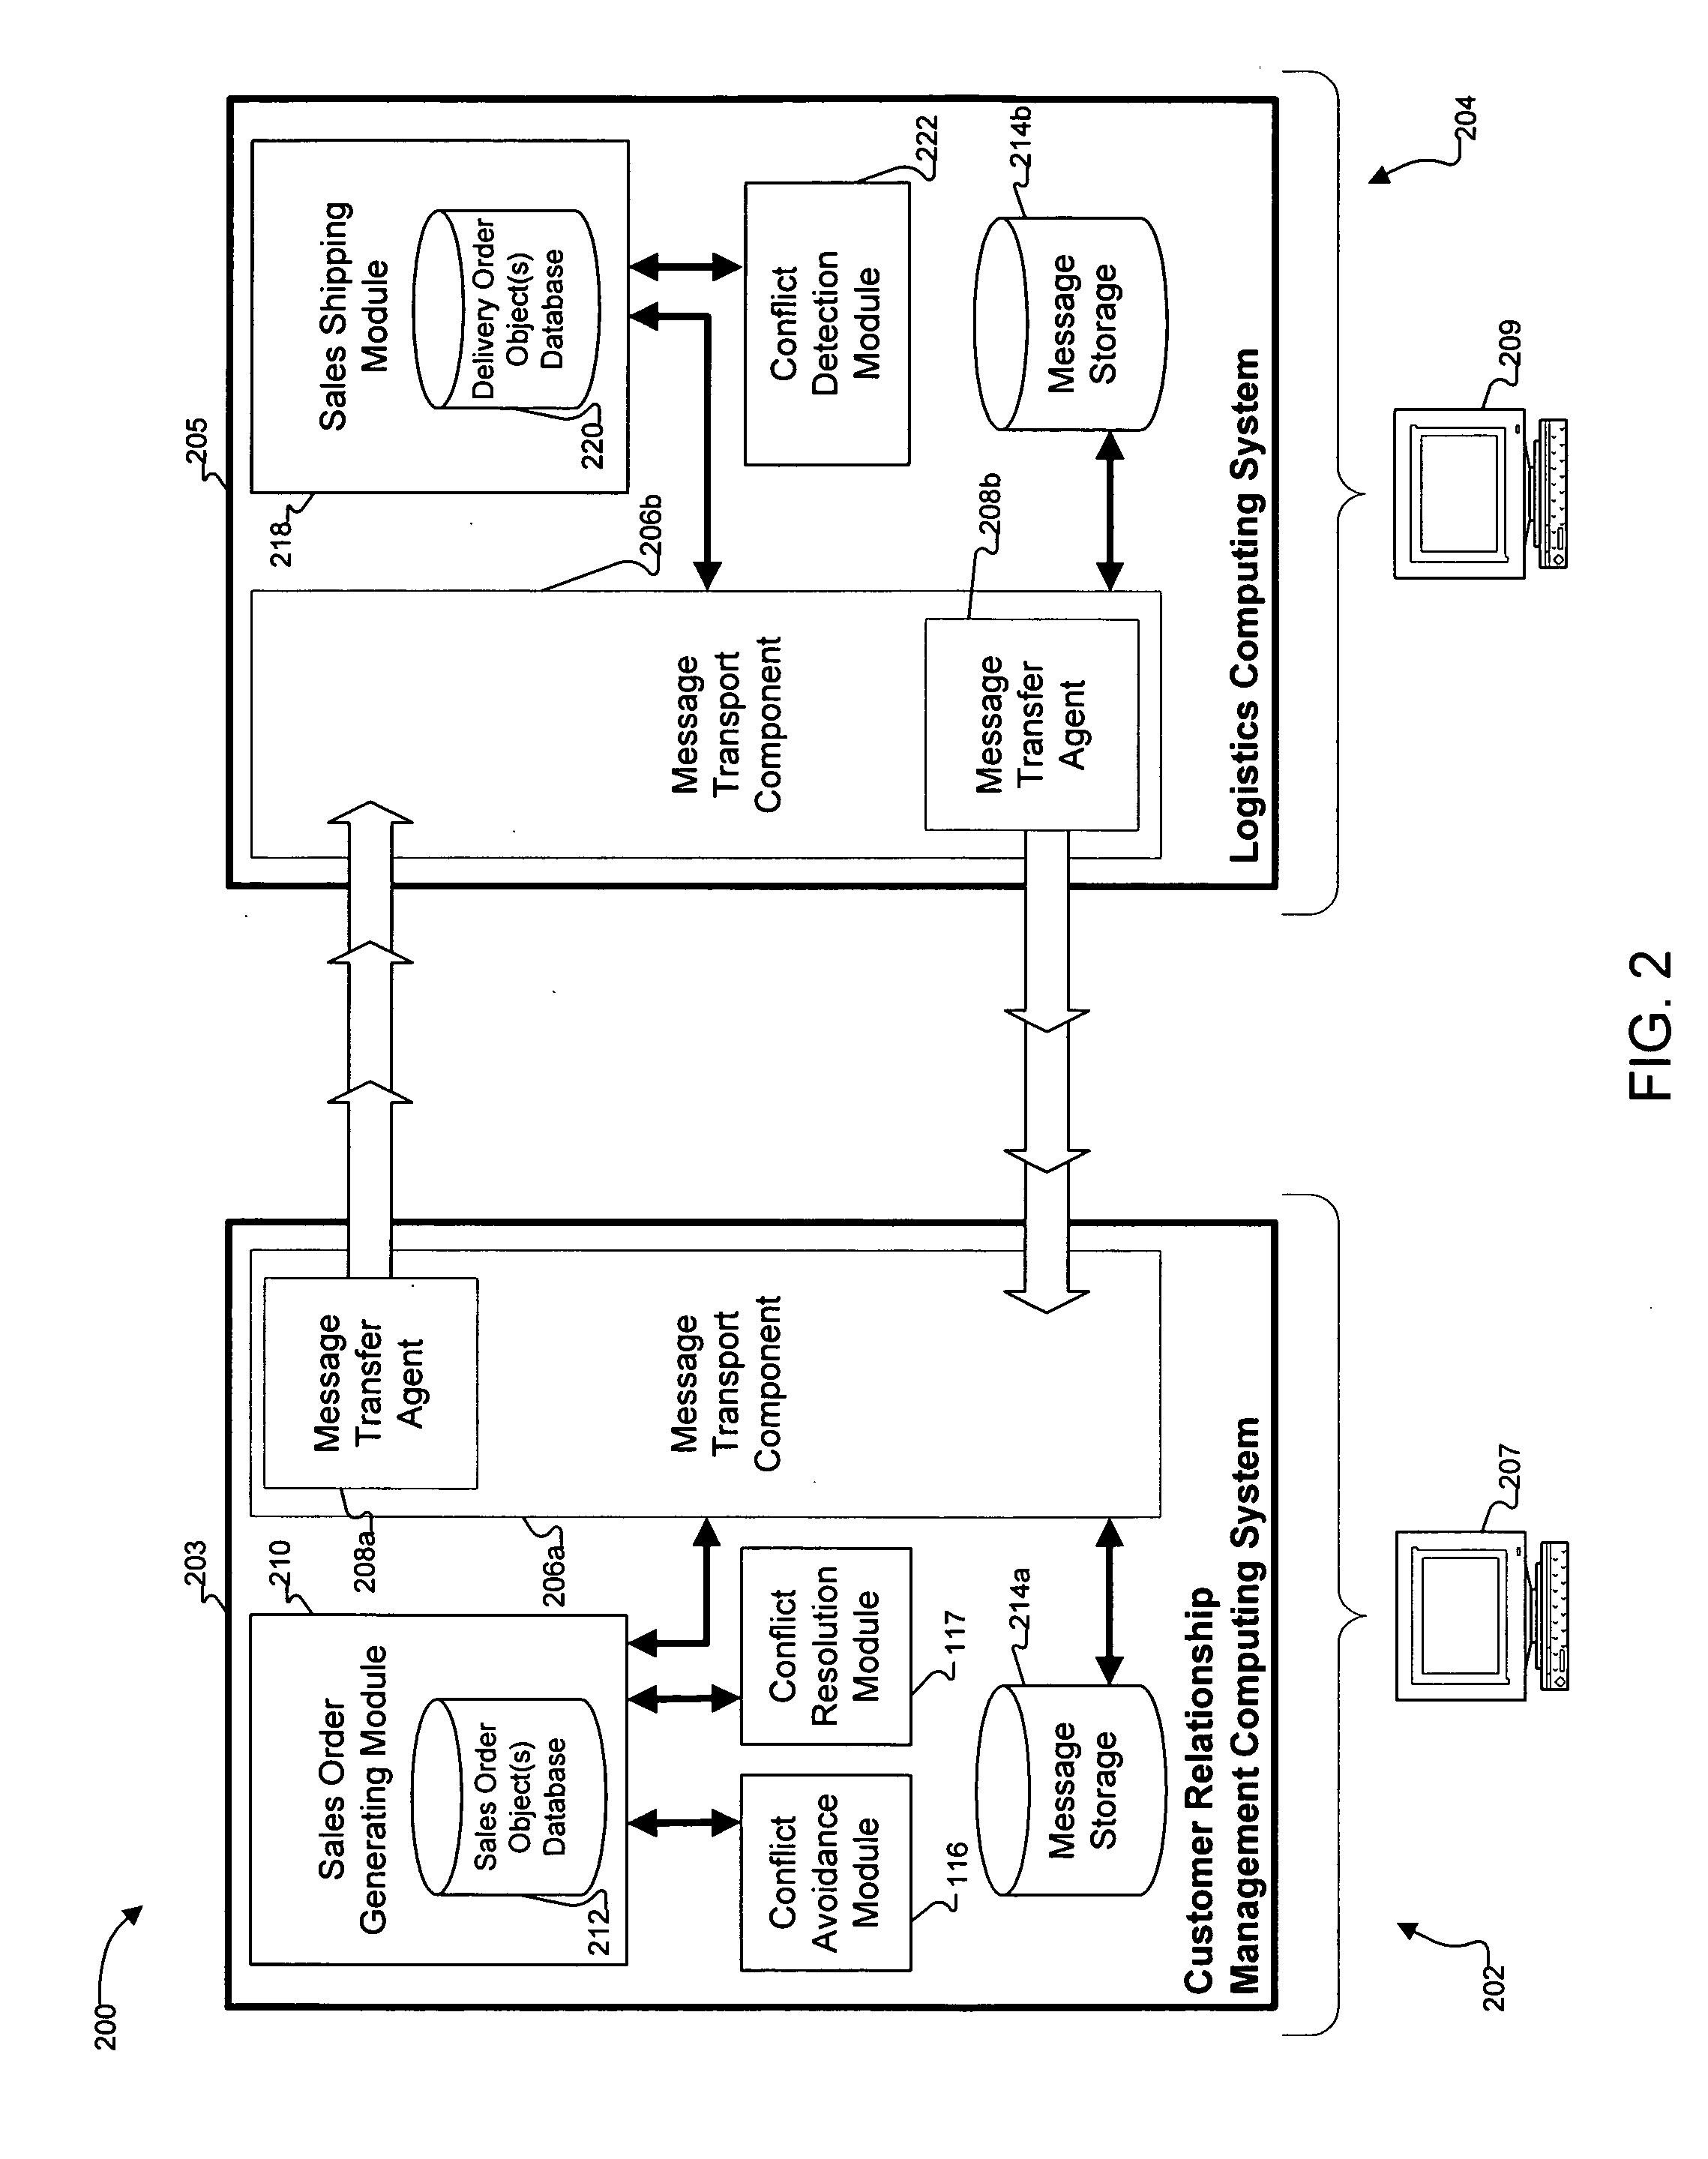 Conflict avoidance and resolution in a distributed computing system